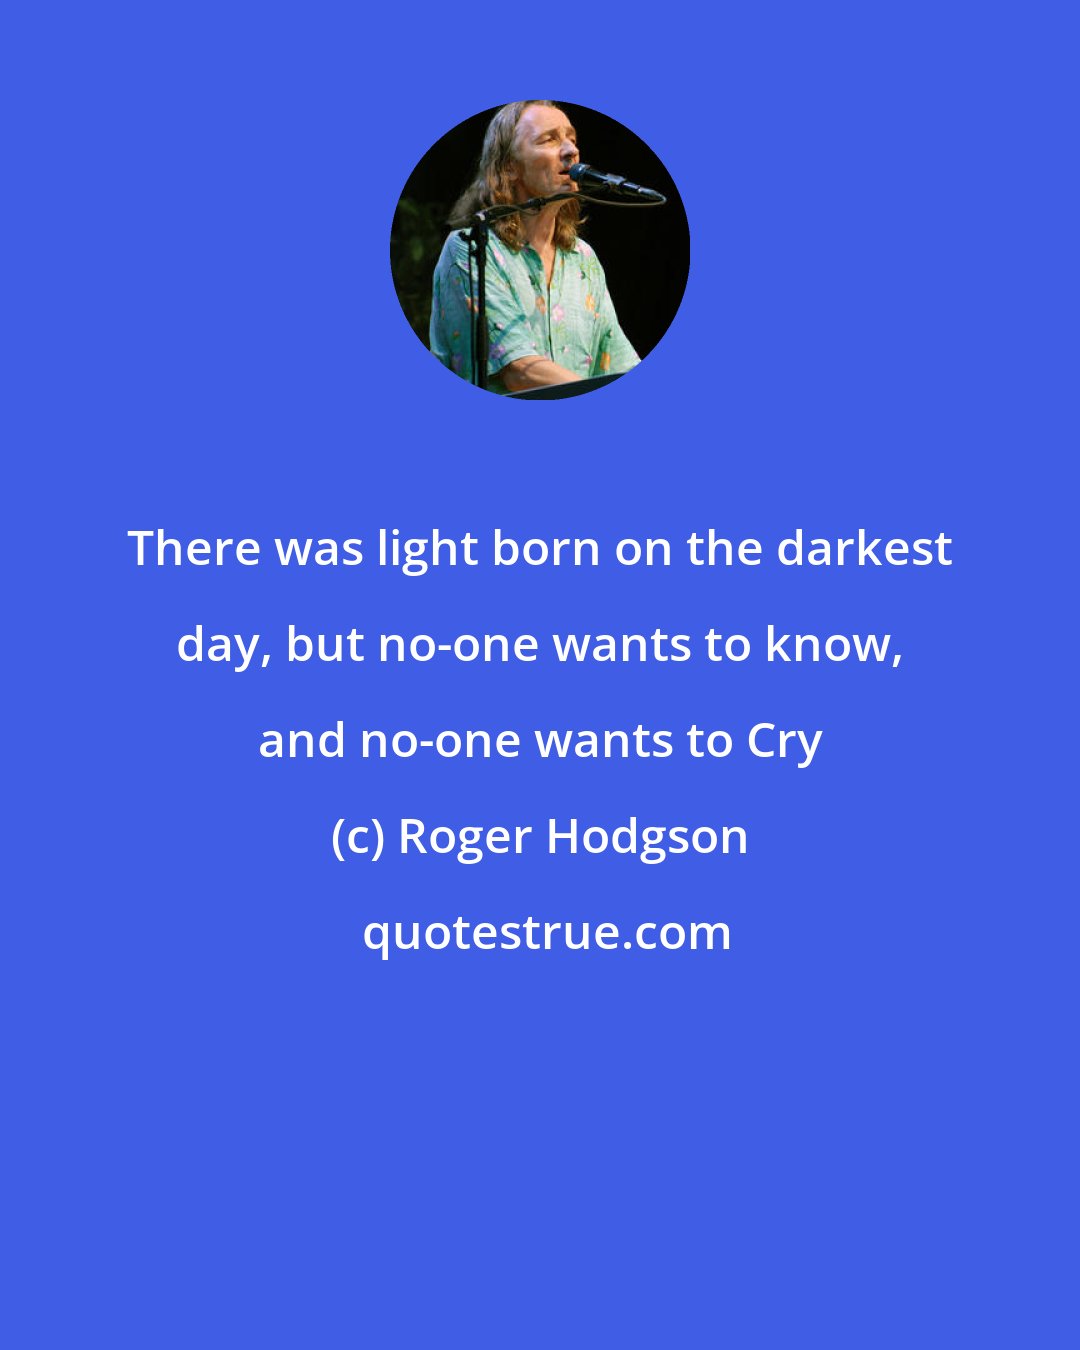 Roger Hodgson: There was light born on the darkest day, but no-one wants to know, and no-one wants to Cry